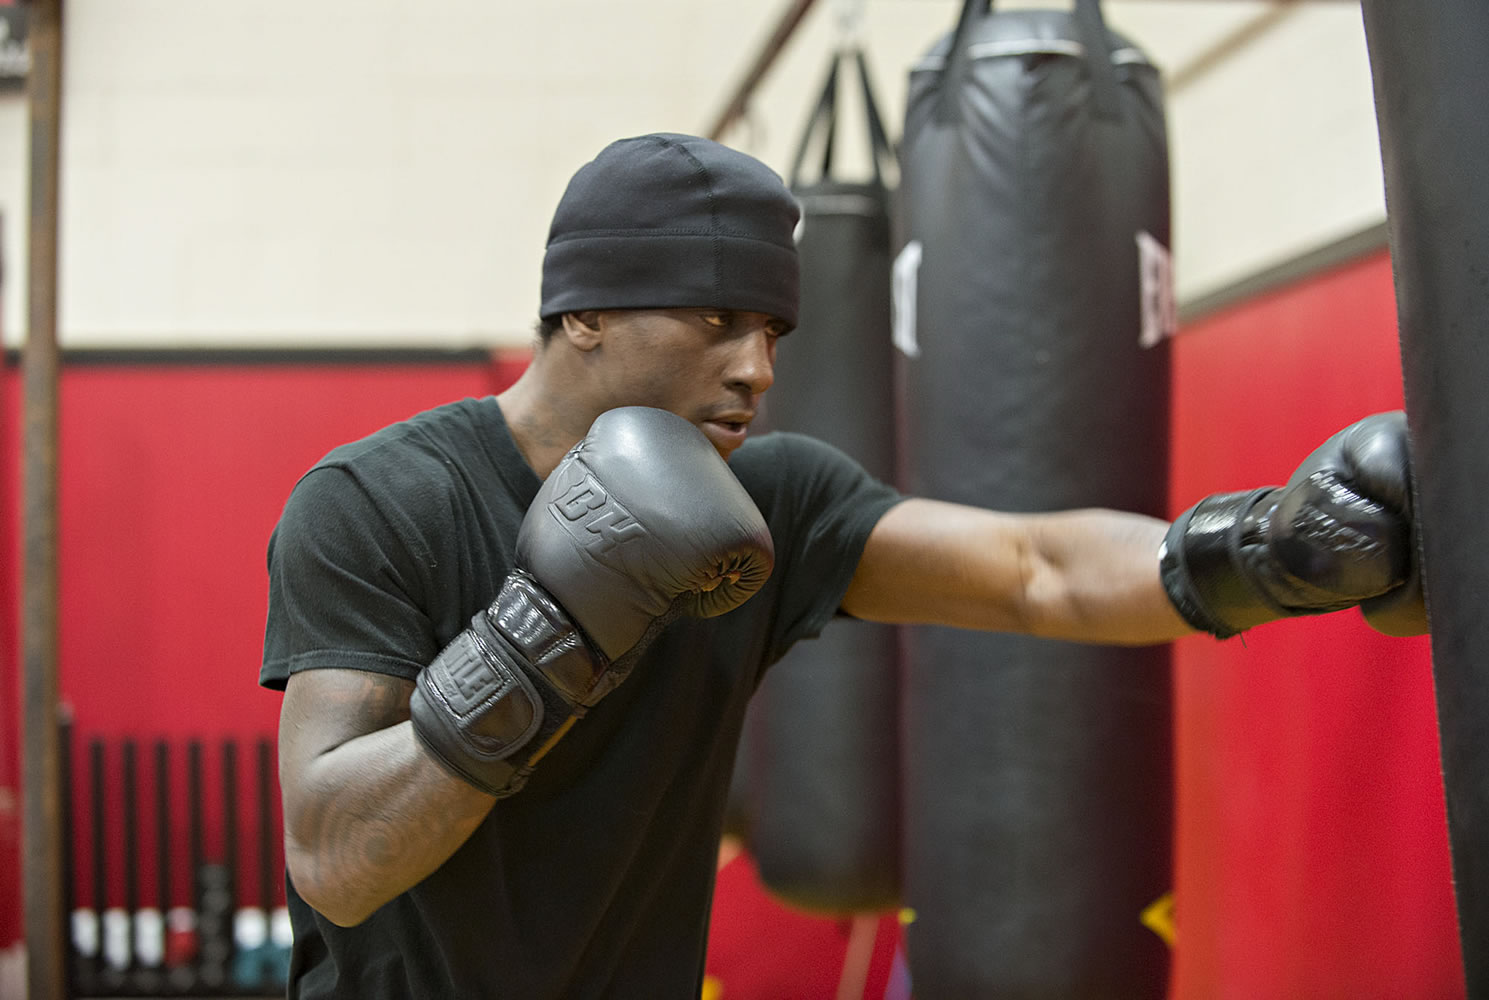 Virgil Green, pioctured training at Fisticuffs Gym in December, is scheduled to fight on June 11 in Tacoma.